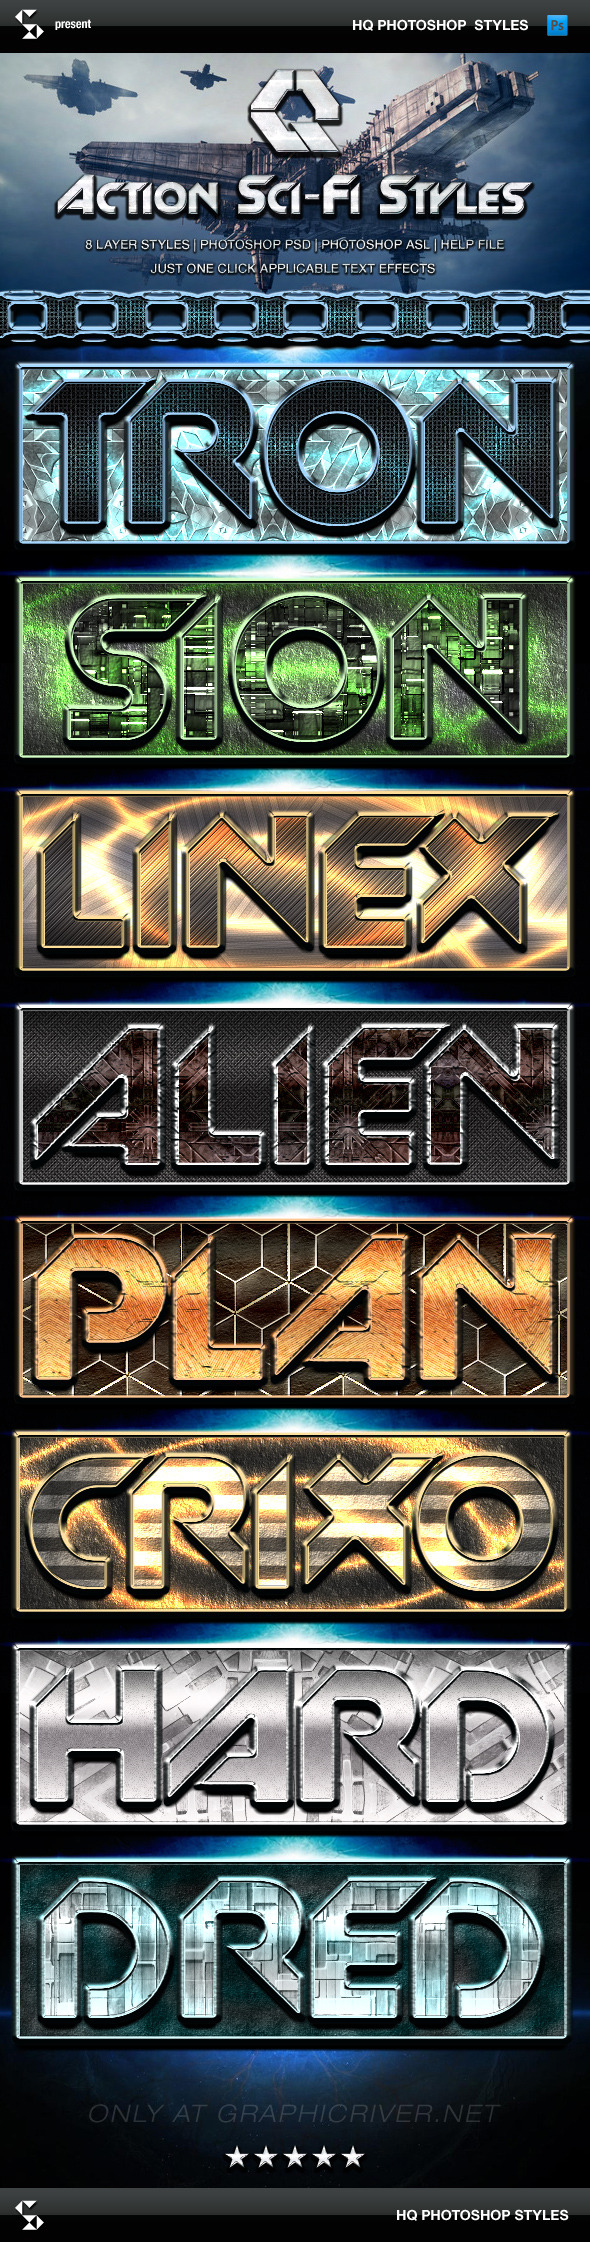 Action Sci-Fi Styles - scifi text effects